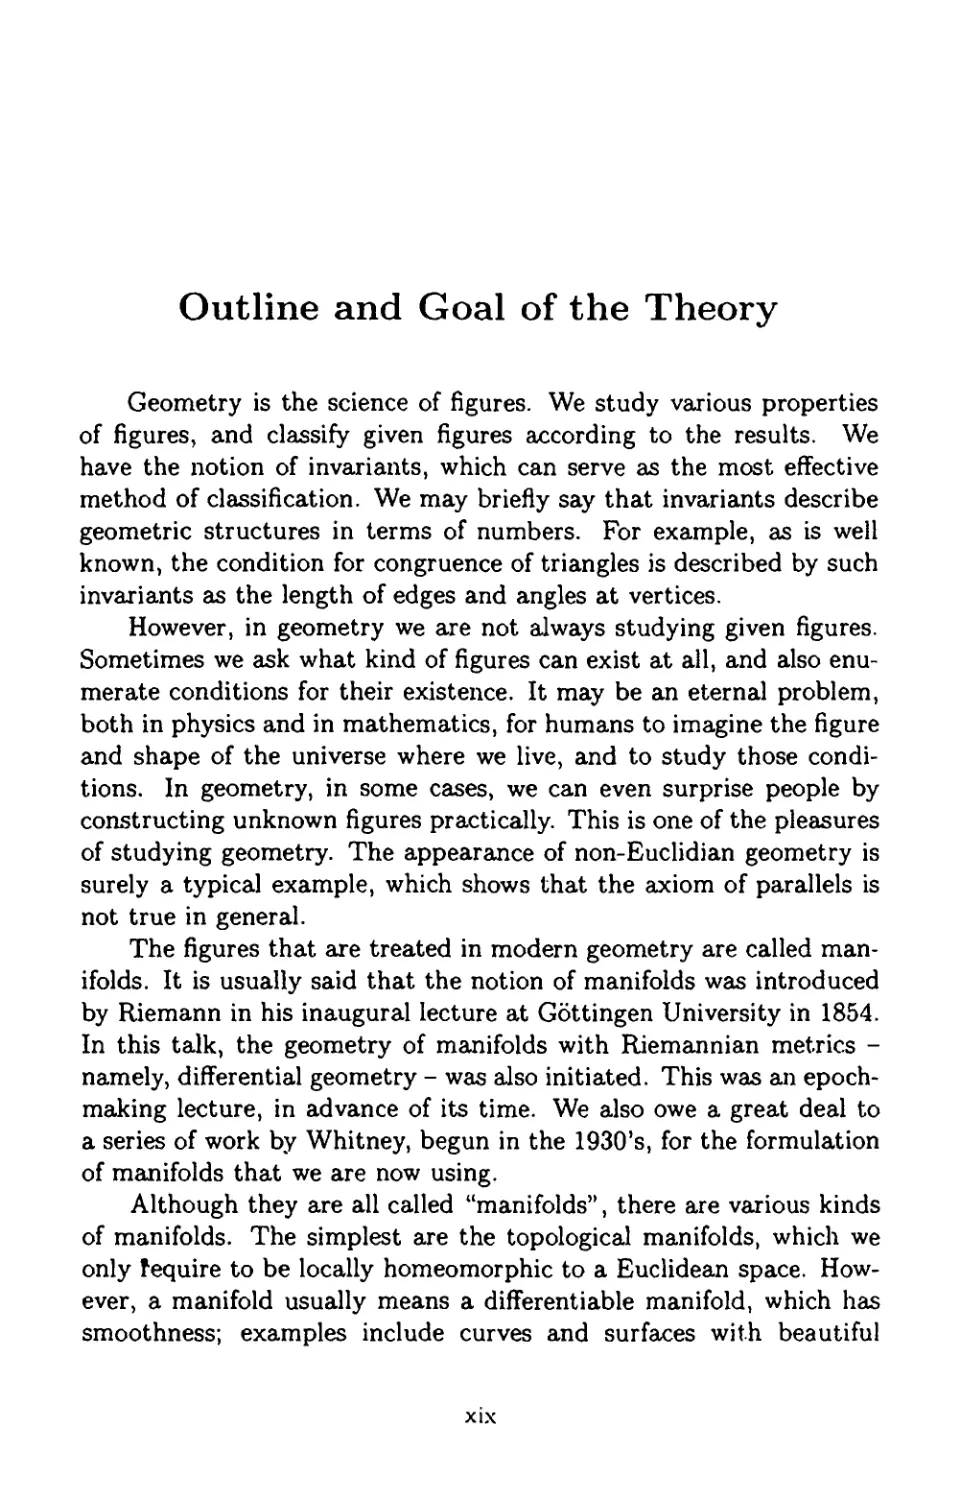 Outline and Goal of the Theory